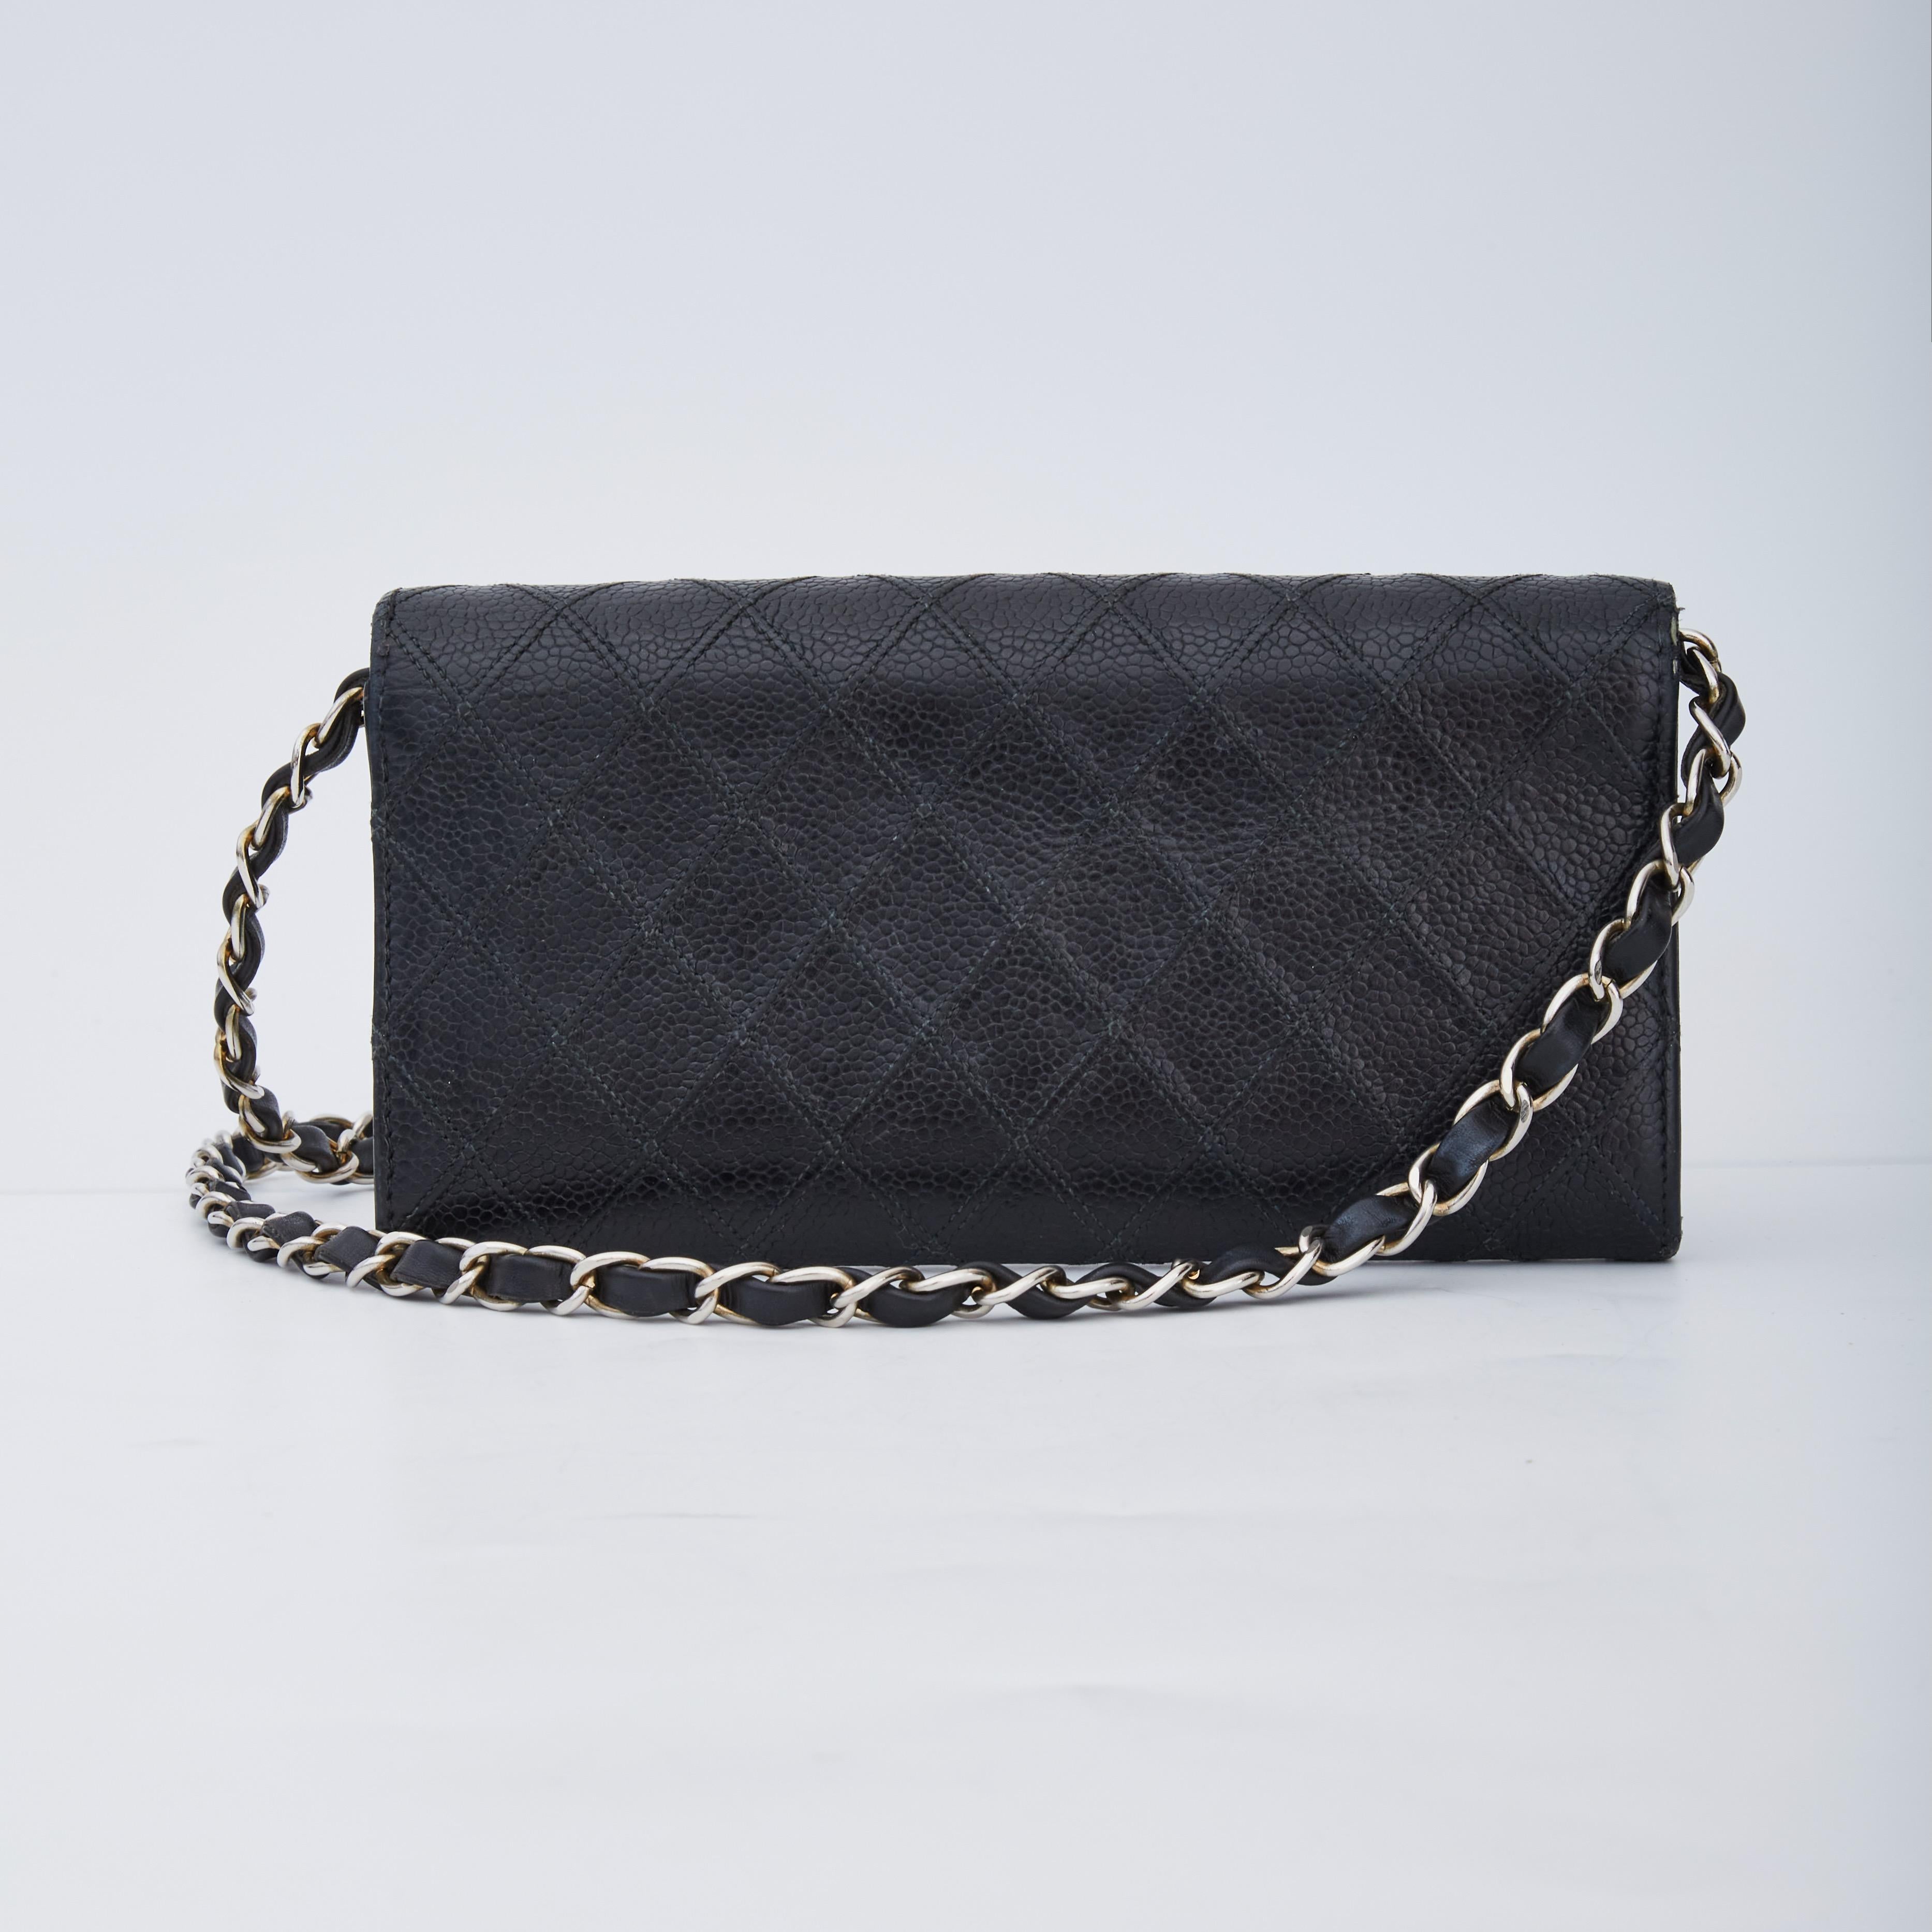 This classic Chanel WOC bag is made of caviar leather in black with sliver tone hardware. The bag features a logo at front, flap closure with snap, a chain interlaced with leather shoulder strap, a portioned interior with car slots and black fabric